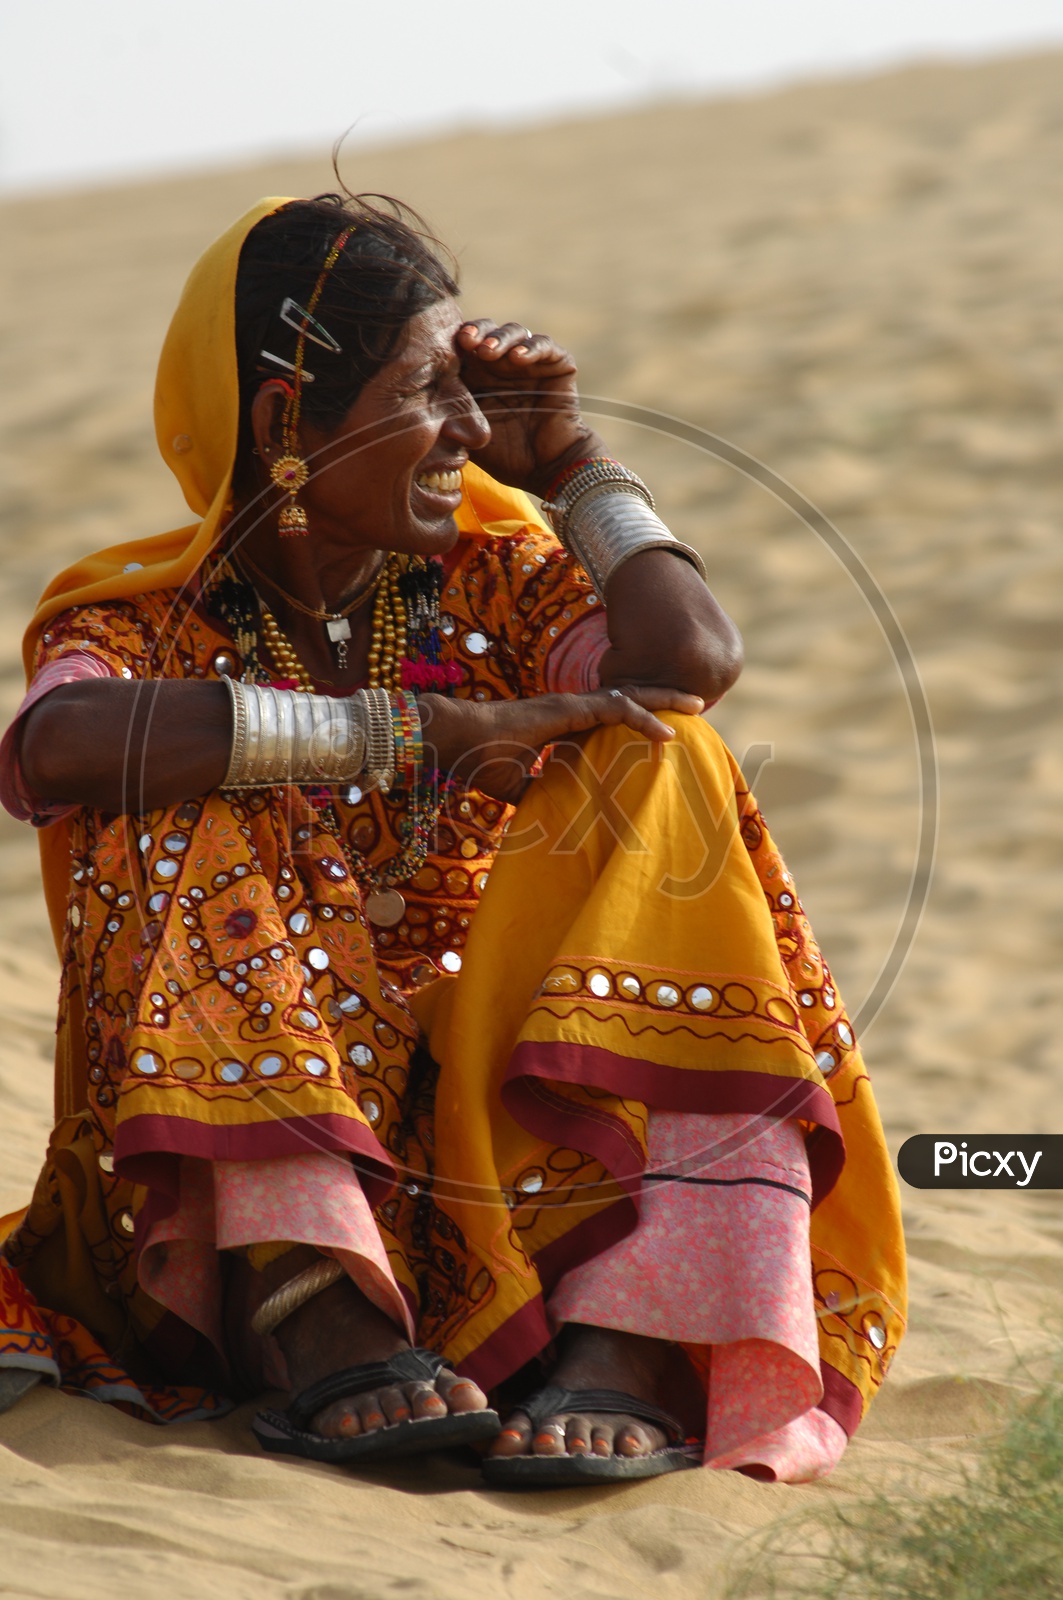 Indian woman in rajasthani dressing attire